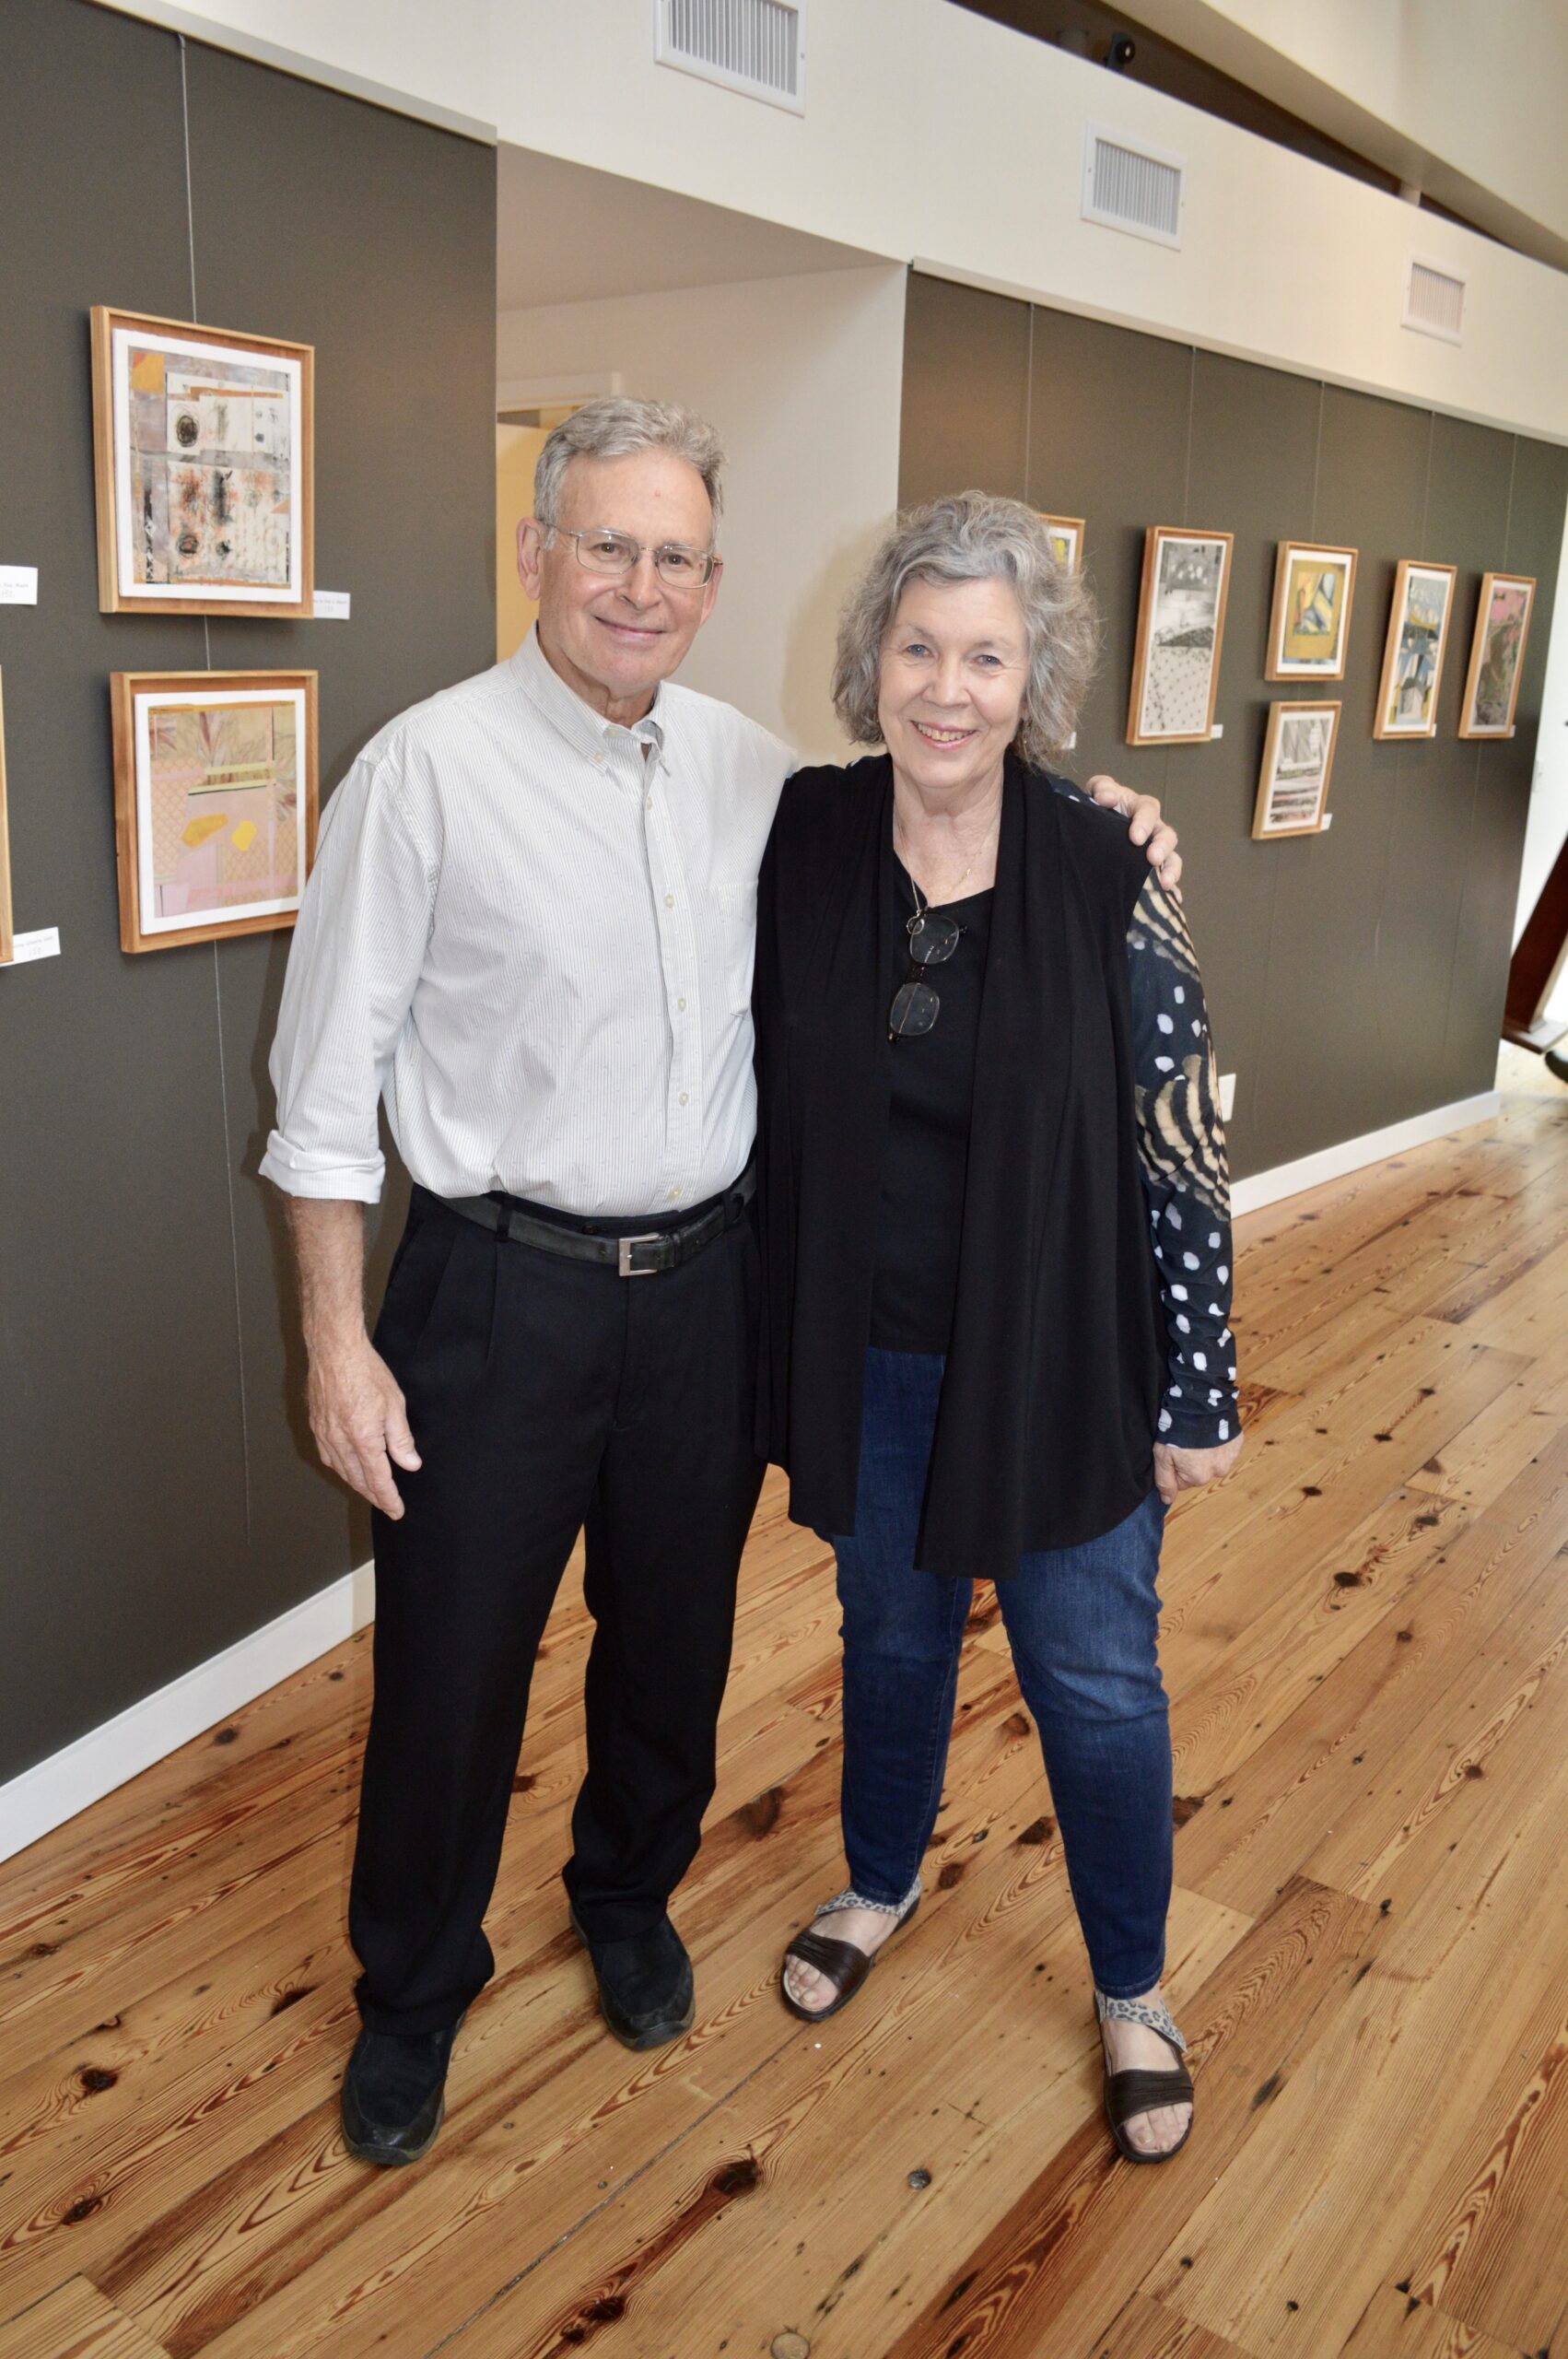 Author John M. William with columnist and author Rheta Grimsley Johnson at Wednesday’s book reading at the Art Haus.